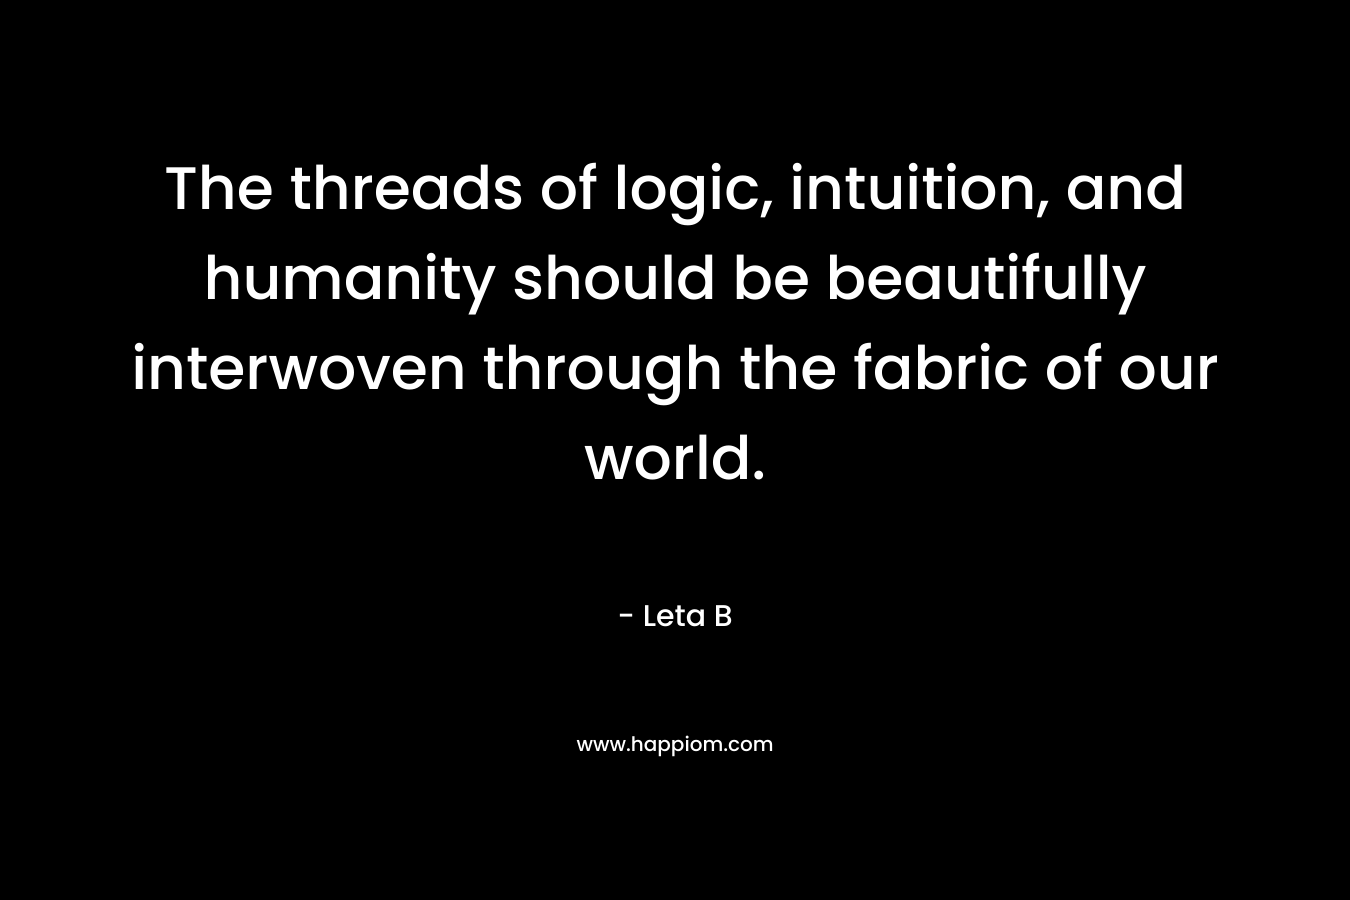 The threads of logic, intuition, and humanity should be beautifully interwoven through the fabric of our world.